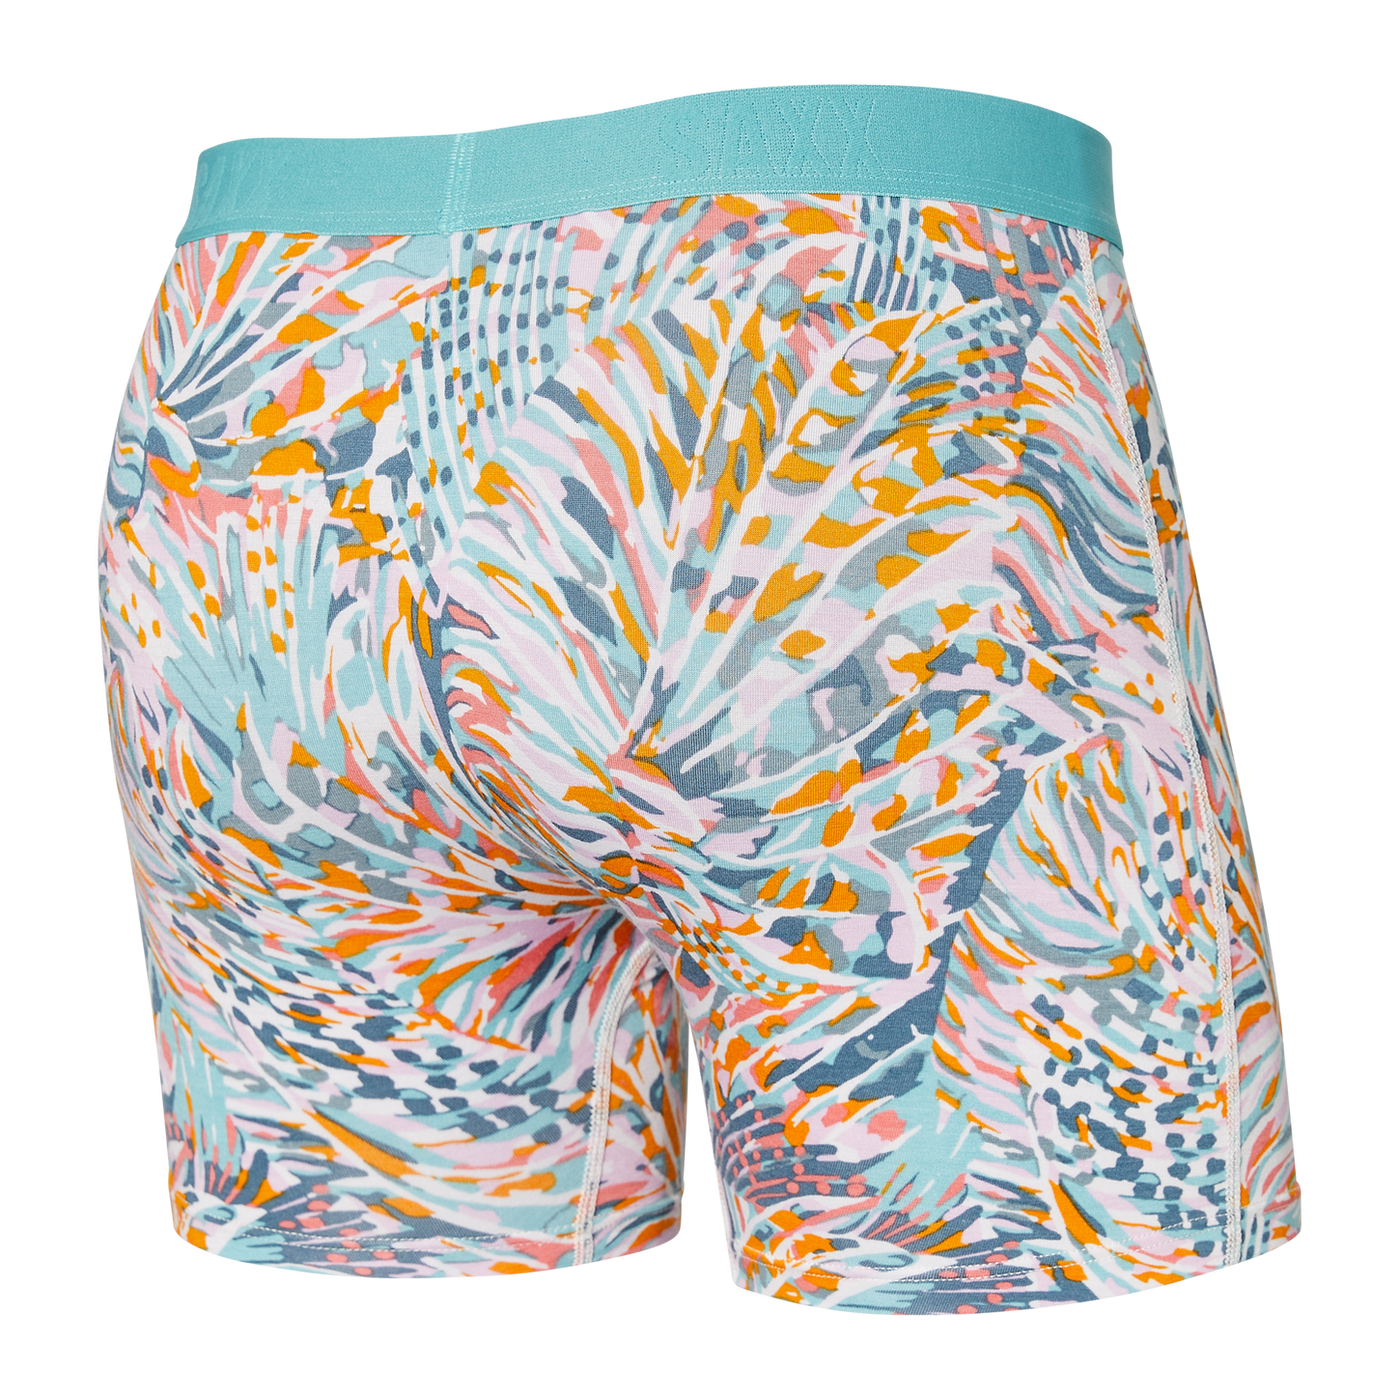 VIBE Boxer Brief - Butterfly Palm- Multi